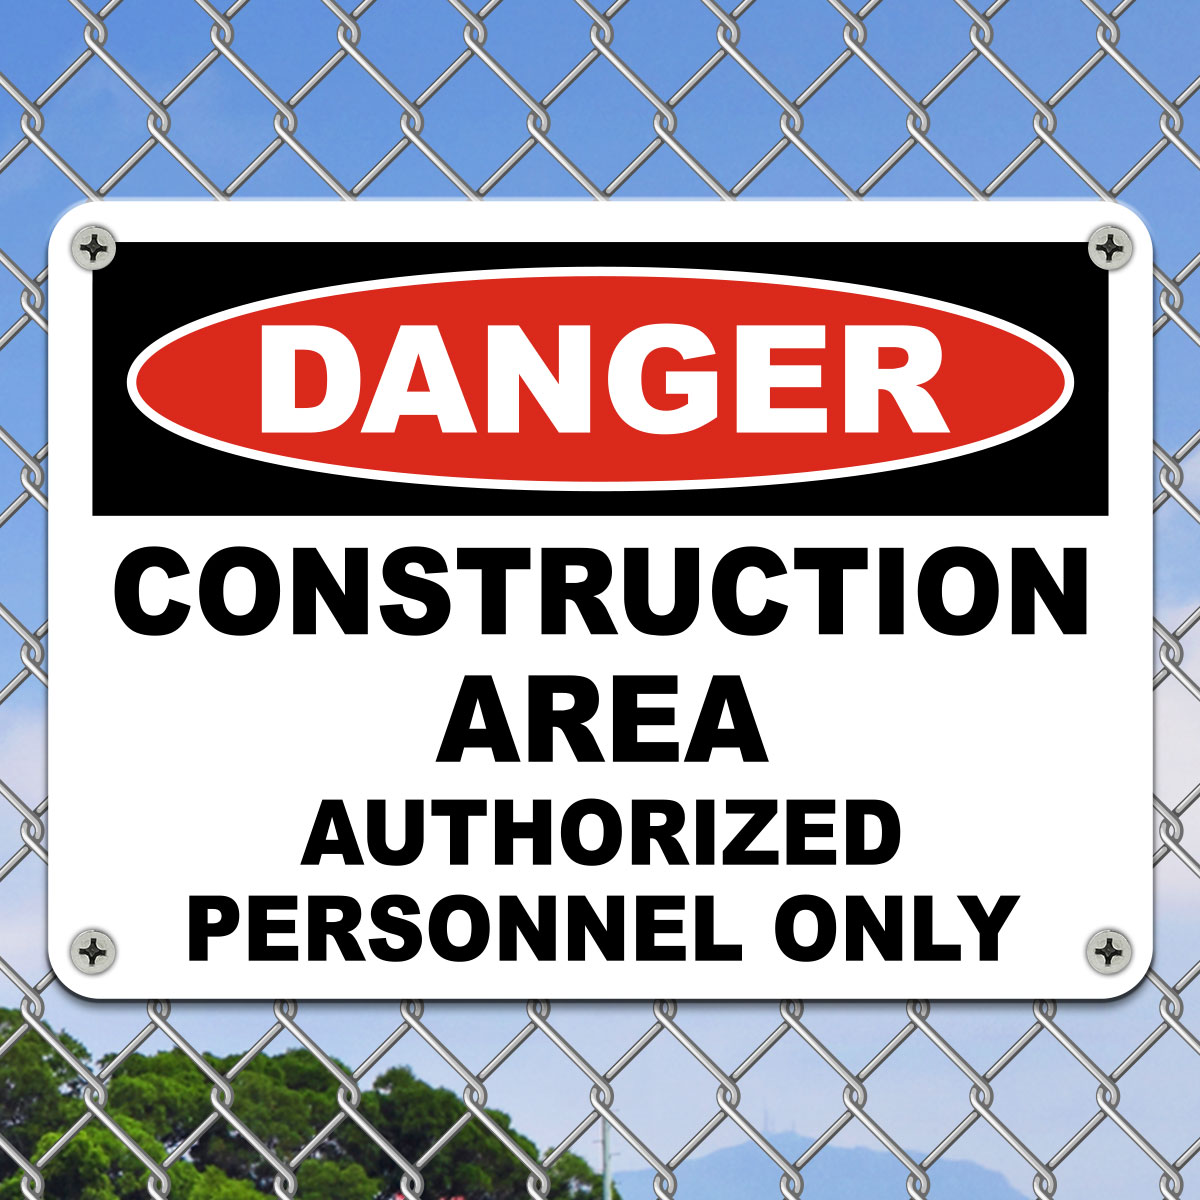 Safety Signs Safety Signs For Construction Sites Images